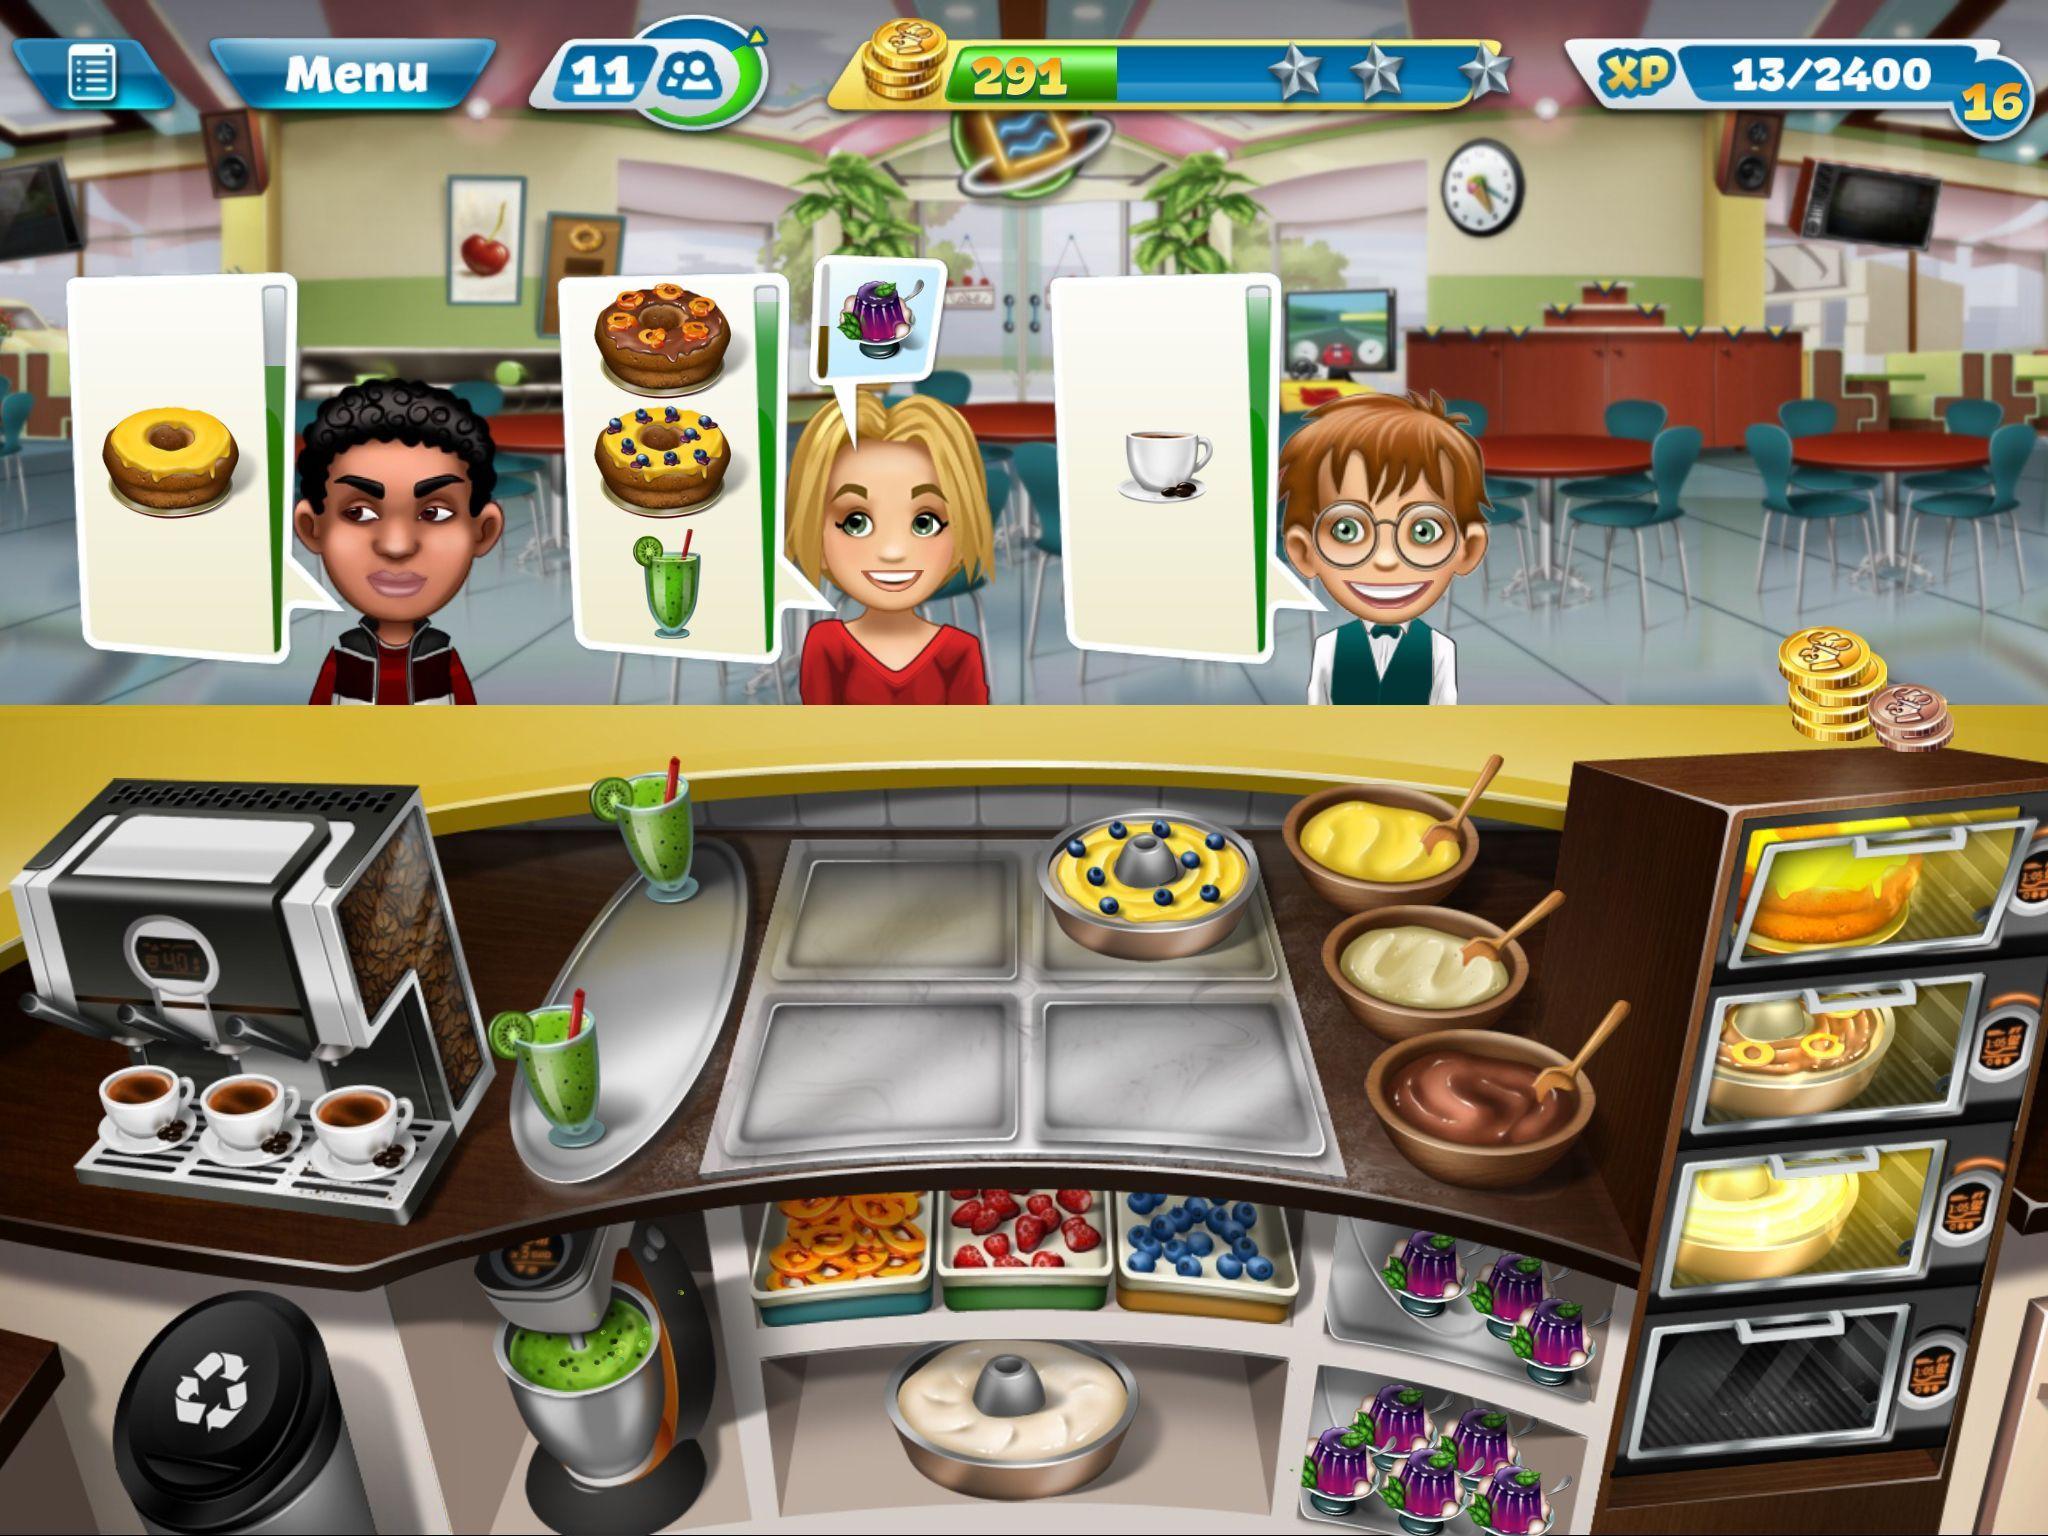 cooking fever game progress lost